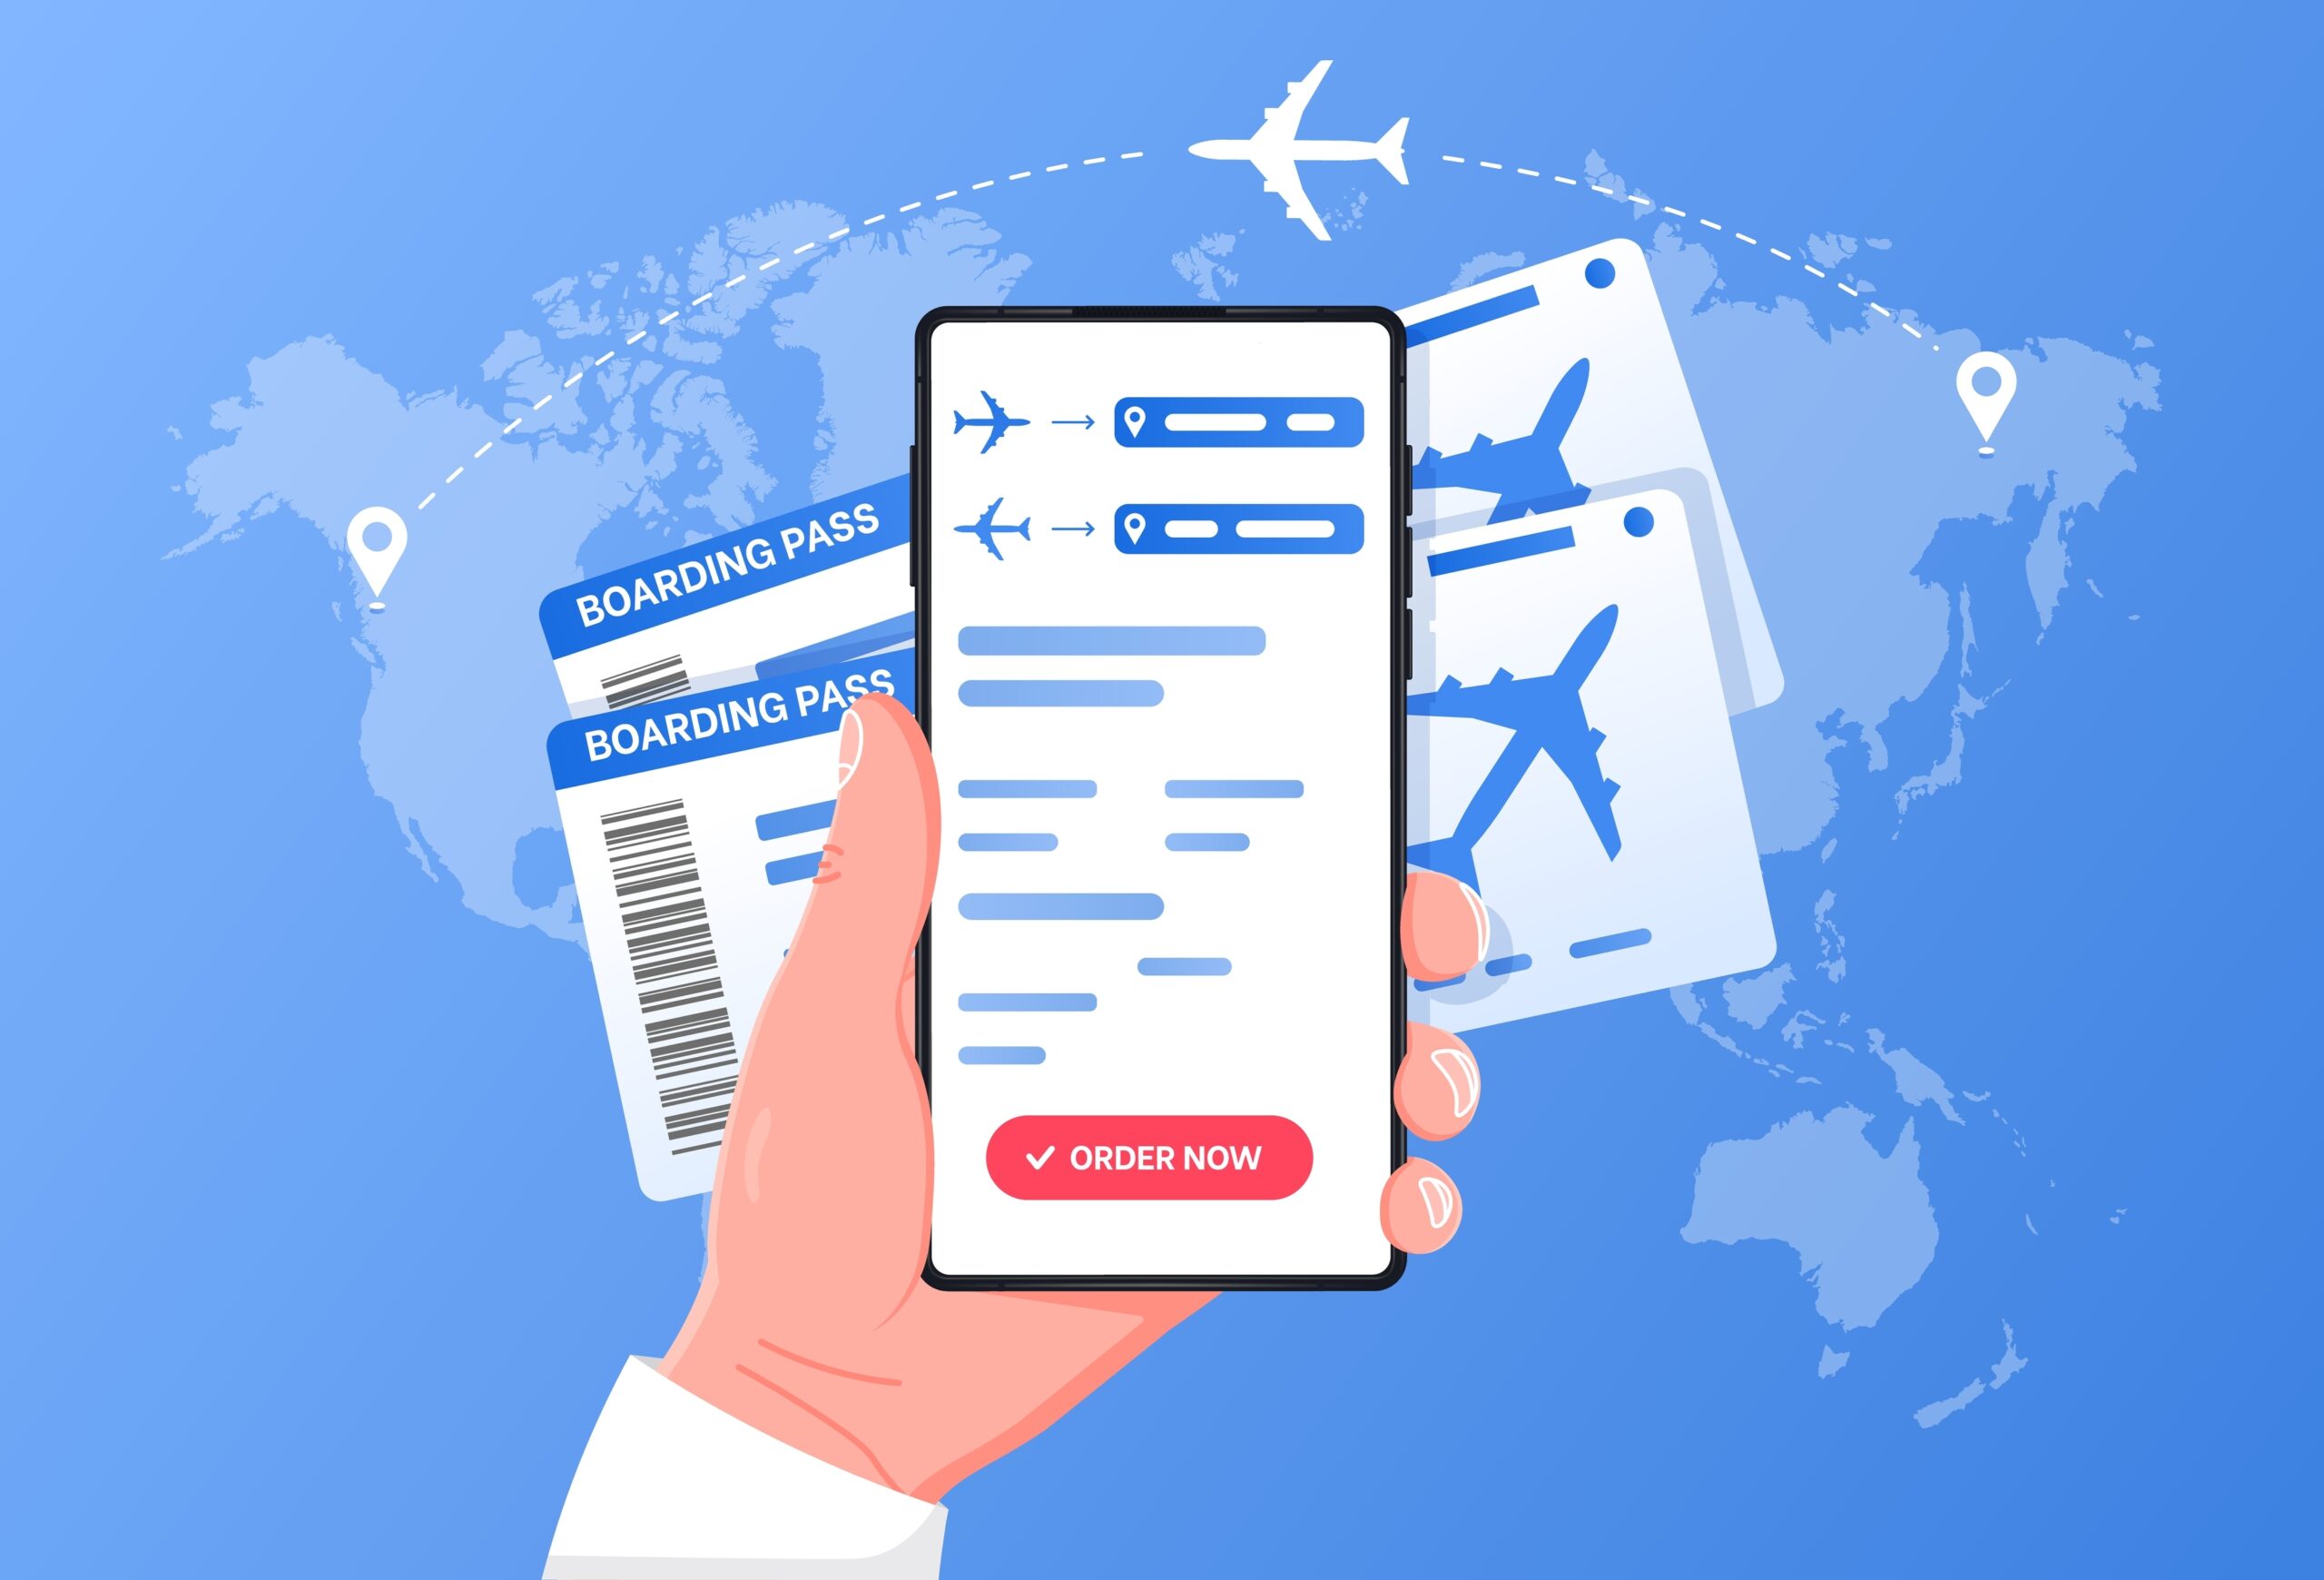 Boarding pass mobile add for online check-in and airplanes flying around in clouds.